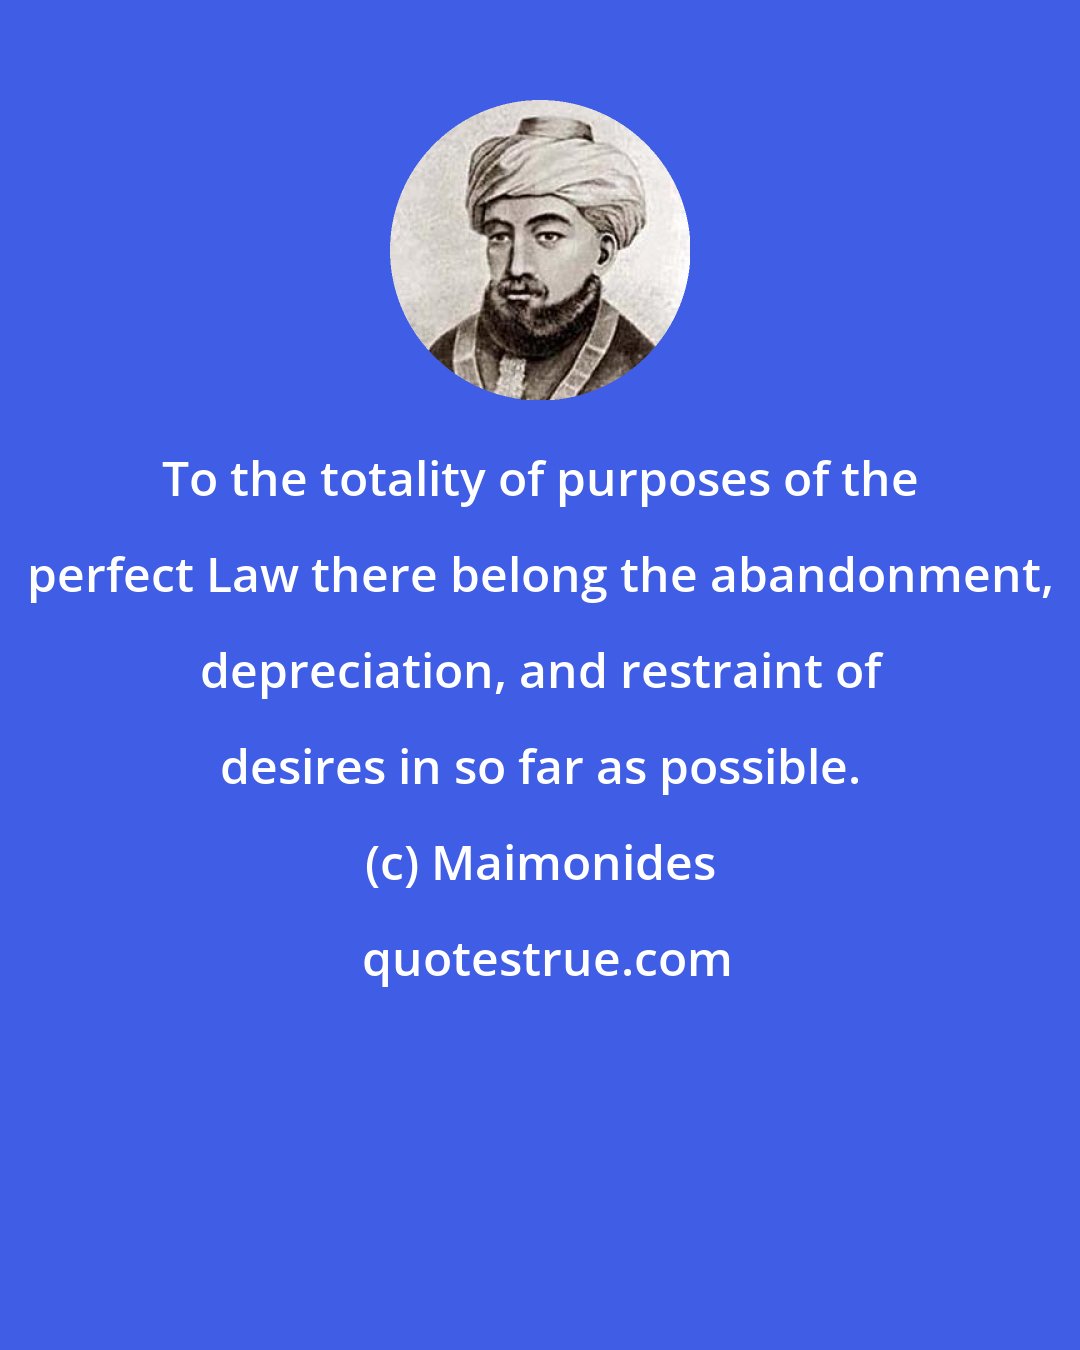 Maimonides: To the totality of purposes of the perfect Law there belong the abandonment, depreciation, and restraint of desires in so far as possible.